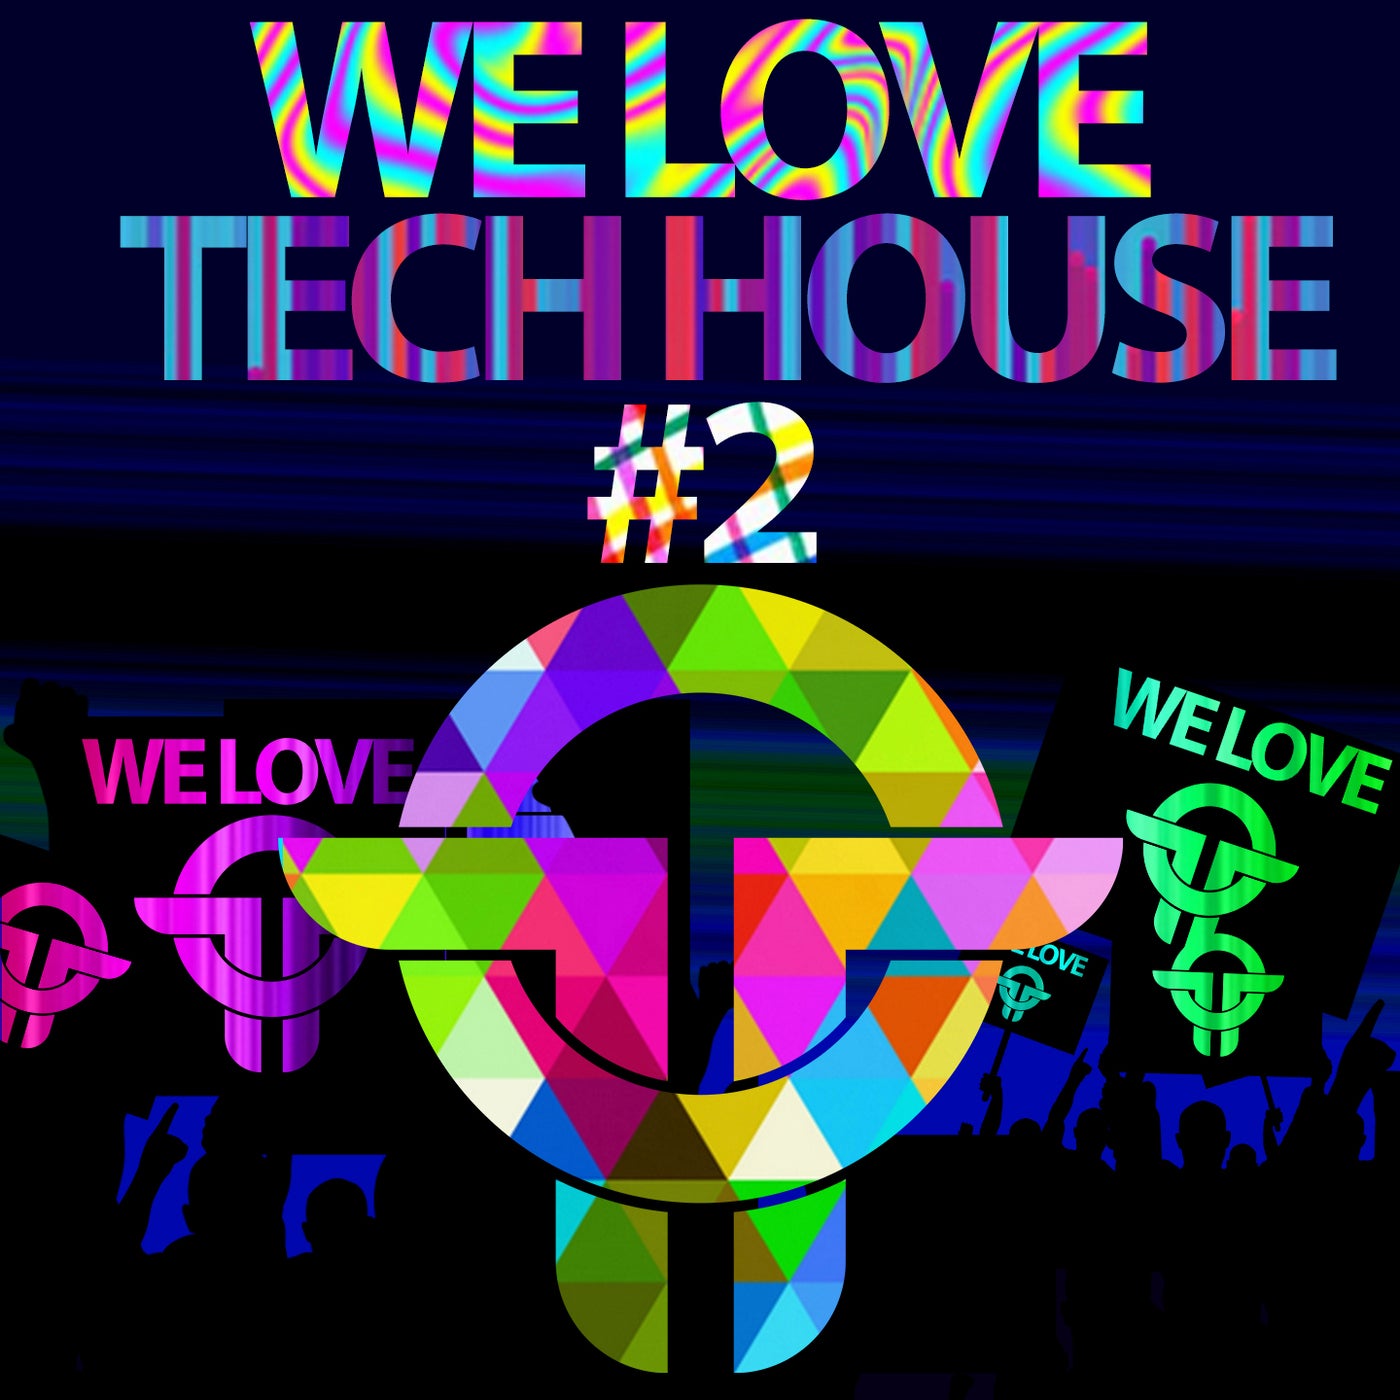 Twists Of Time We Love Tech House #2